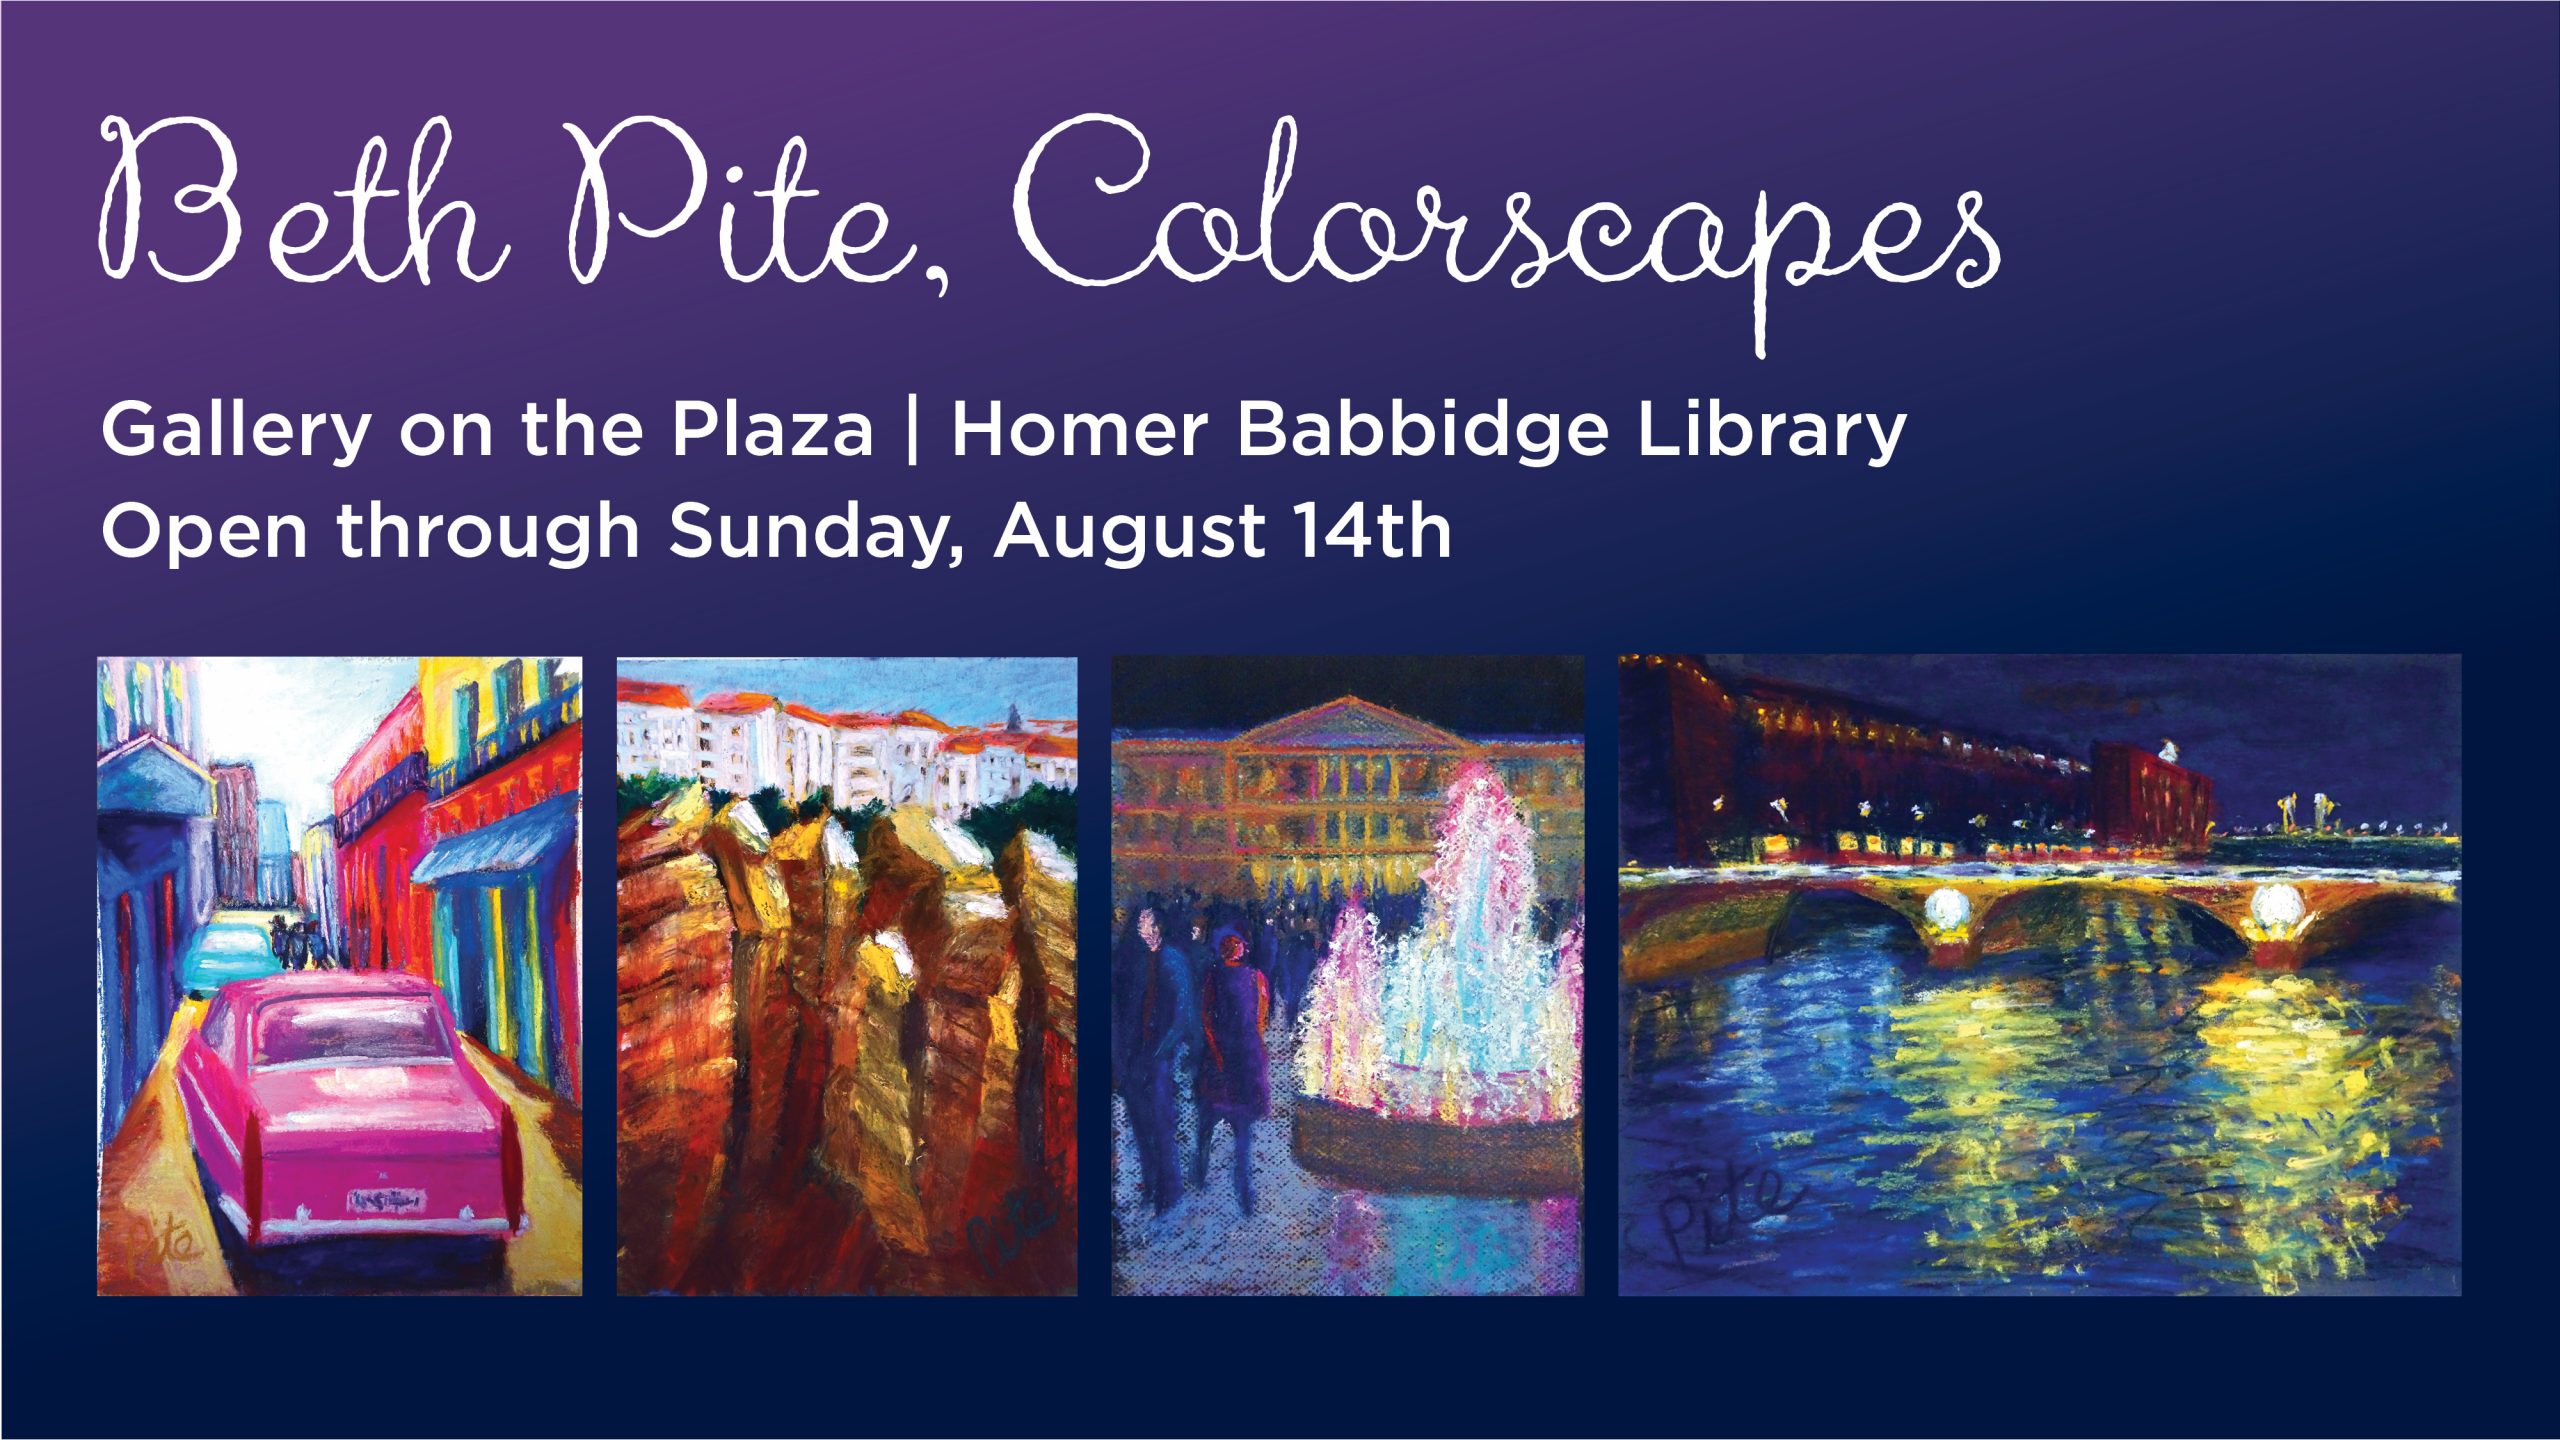 Four Images of colorful paintings by Beth Pite, with the text: Beth Pite, Colorscapes - Gallery on the Plaza | Homer Babbidge Library | Open through Sunday, August 14th, 2022 lib.uconn.edu/about/exhibits